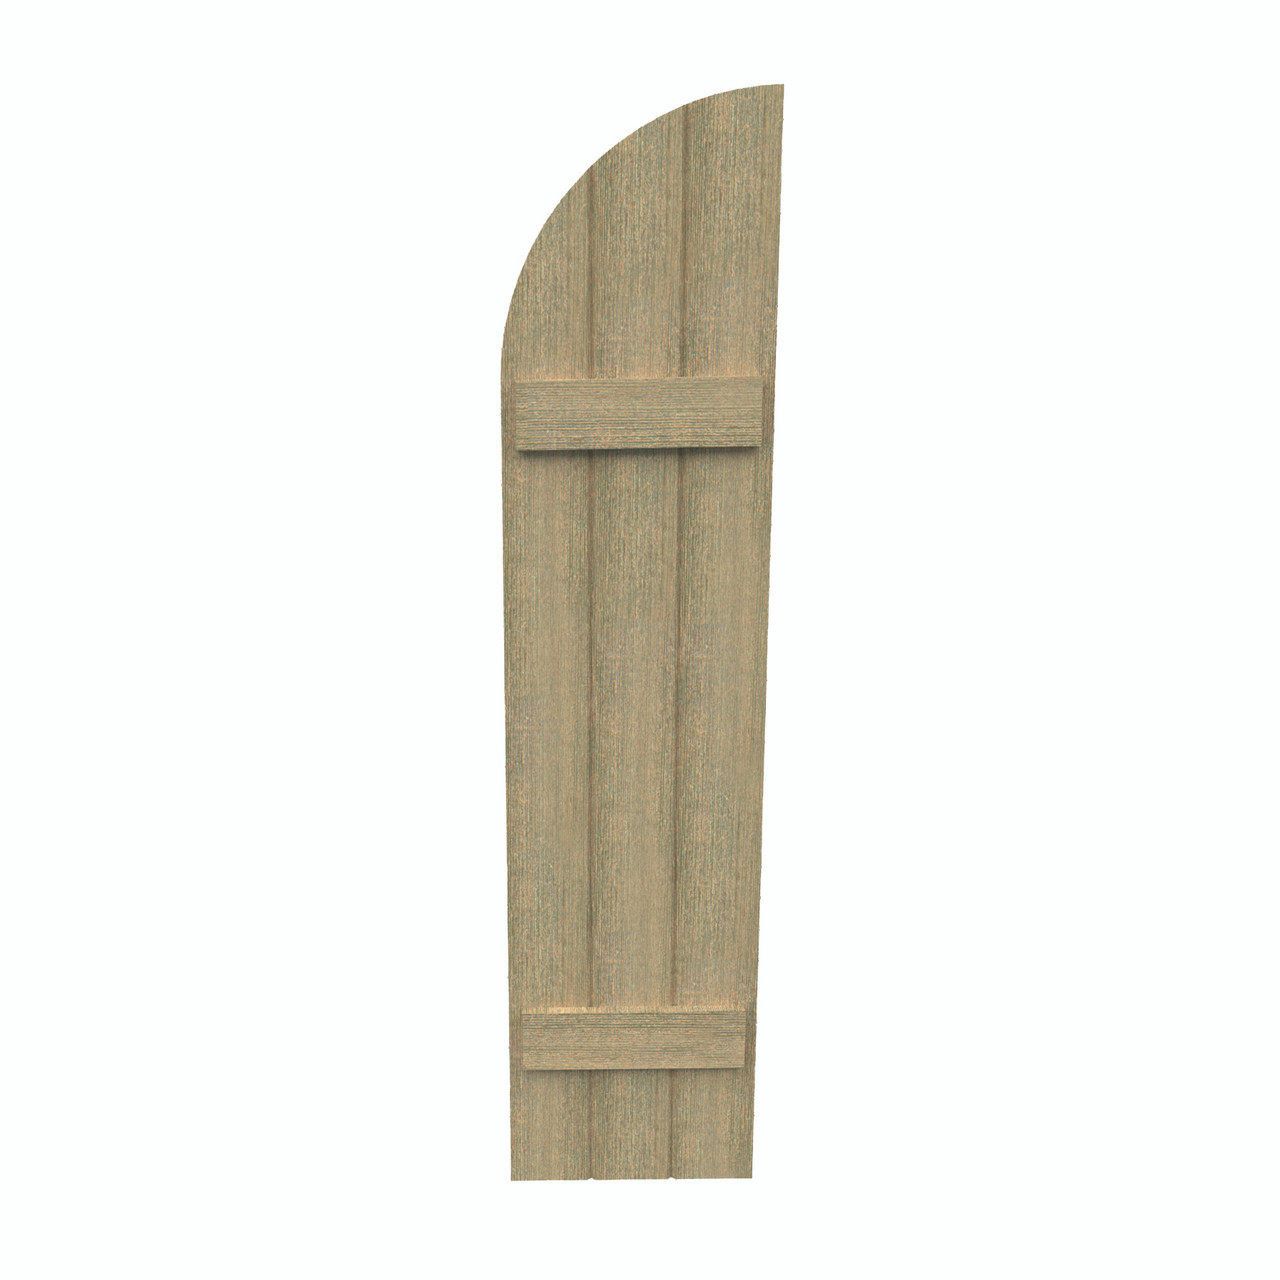 14 inch by 49 inch Quarter Round Shutter with 3-Boards